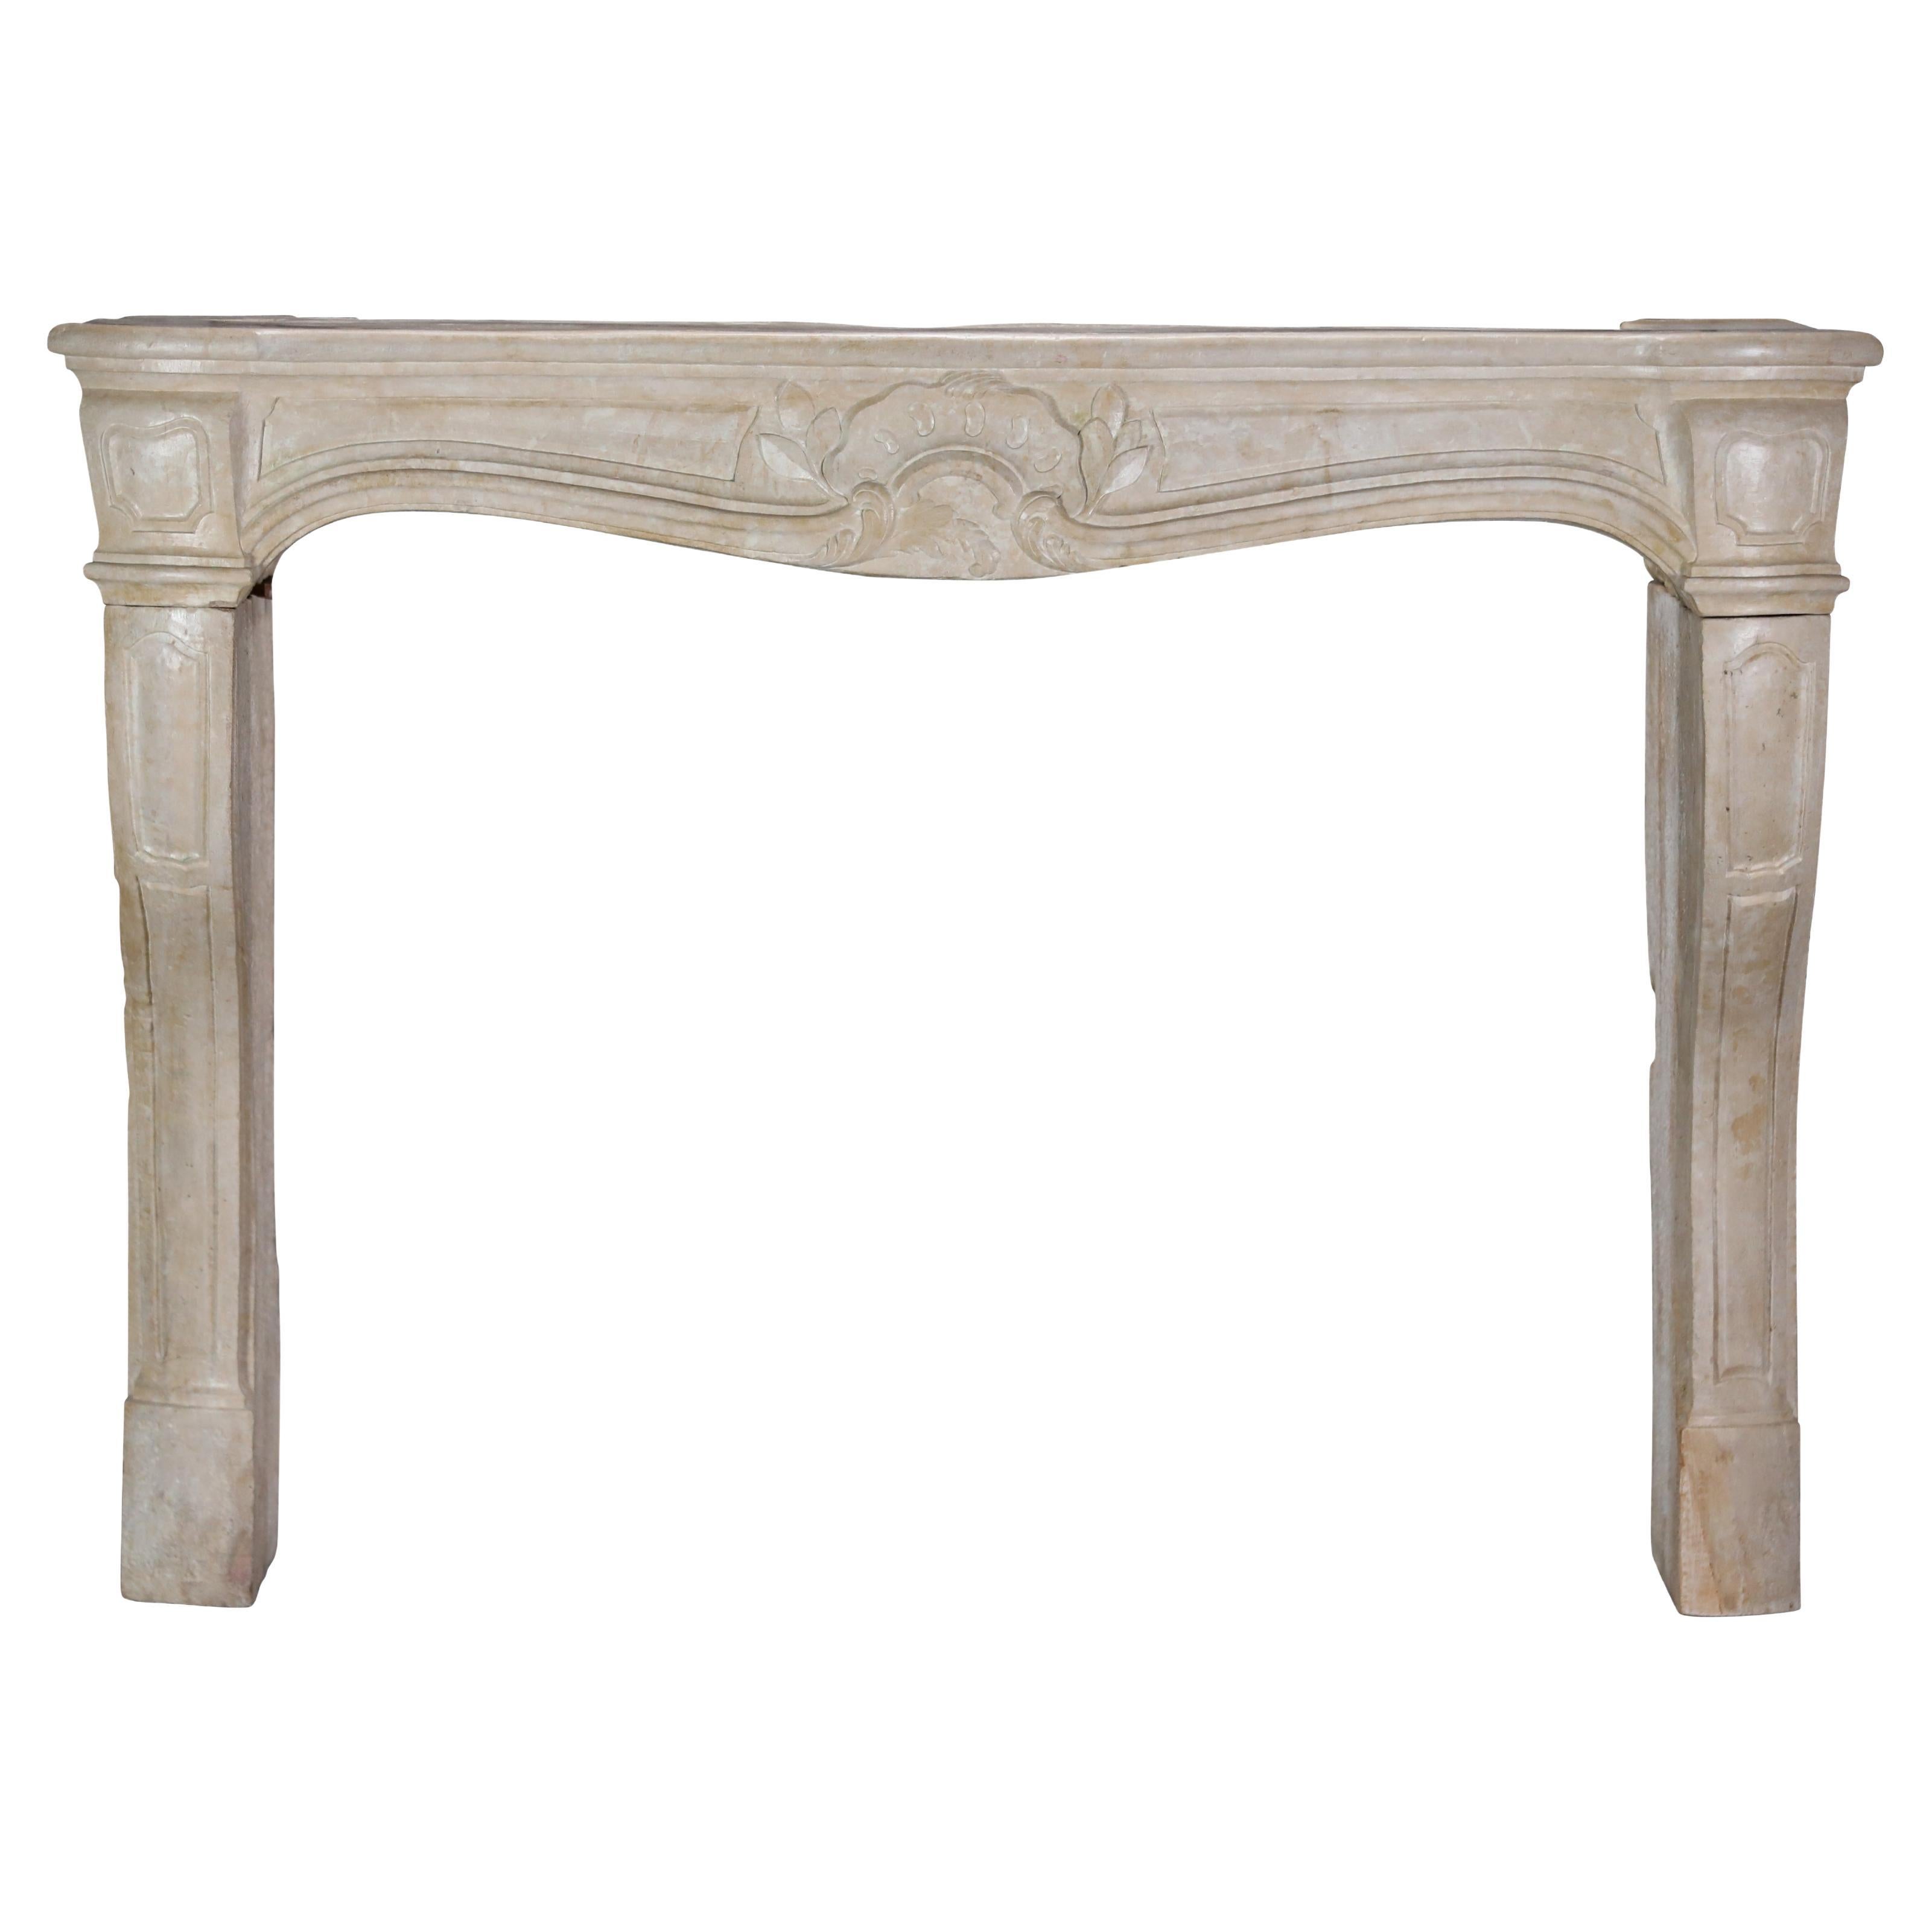 18th Century Classic French Regency Period Light Limestone Fireplace Mantle For Sale